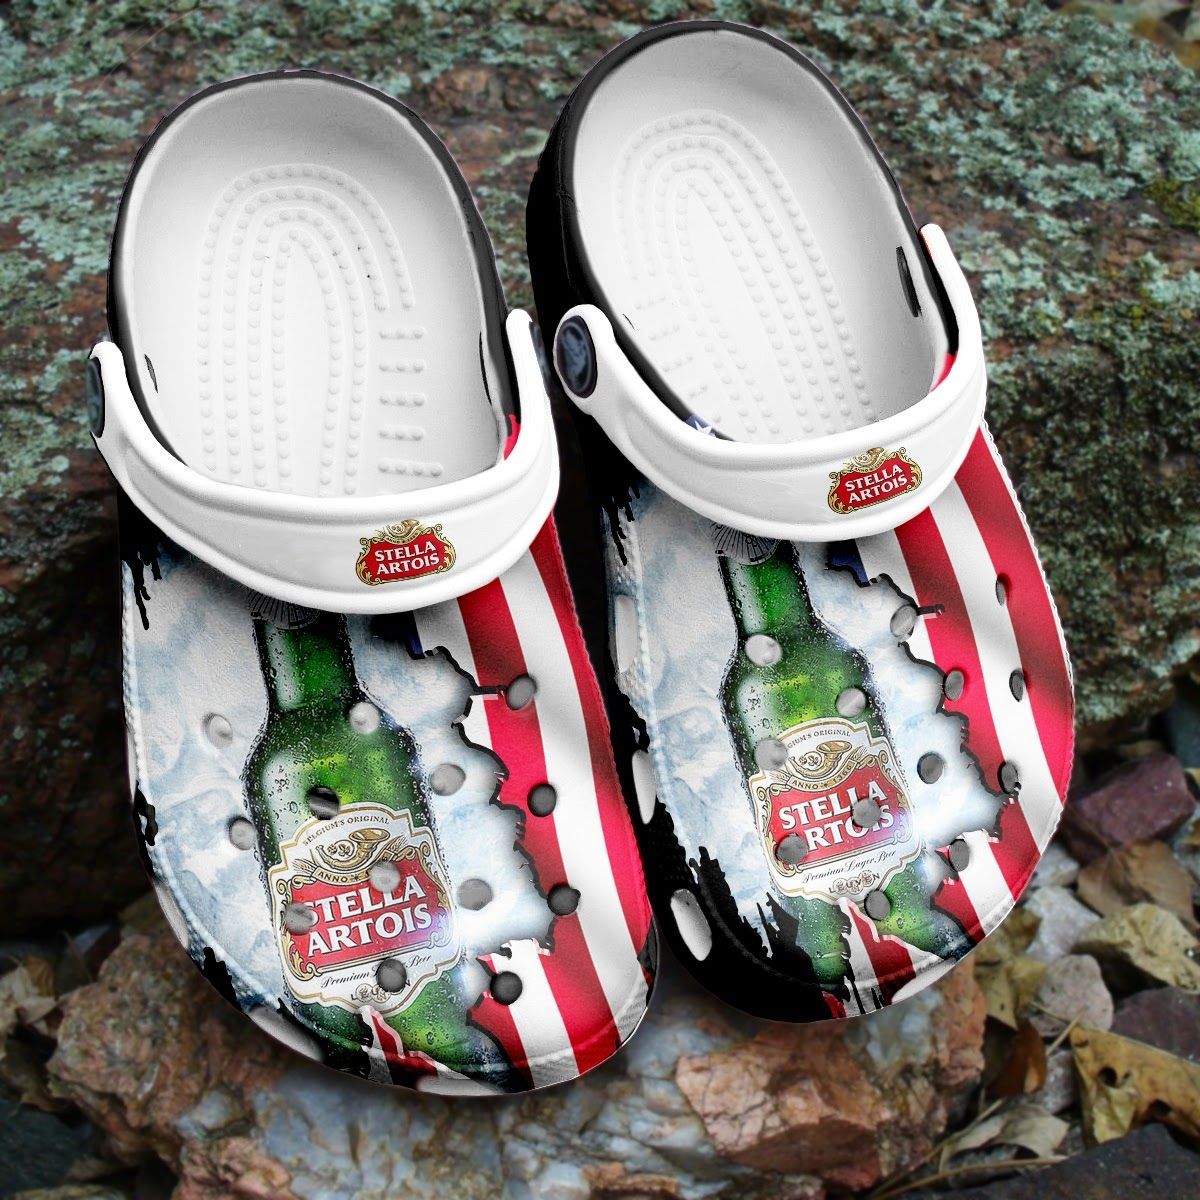 If you'd like to purchase a pair of Crocband Clogs, be sure to check out the official website. 108